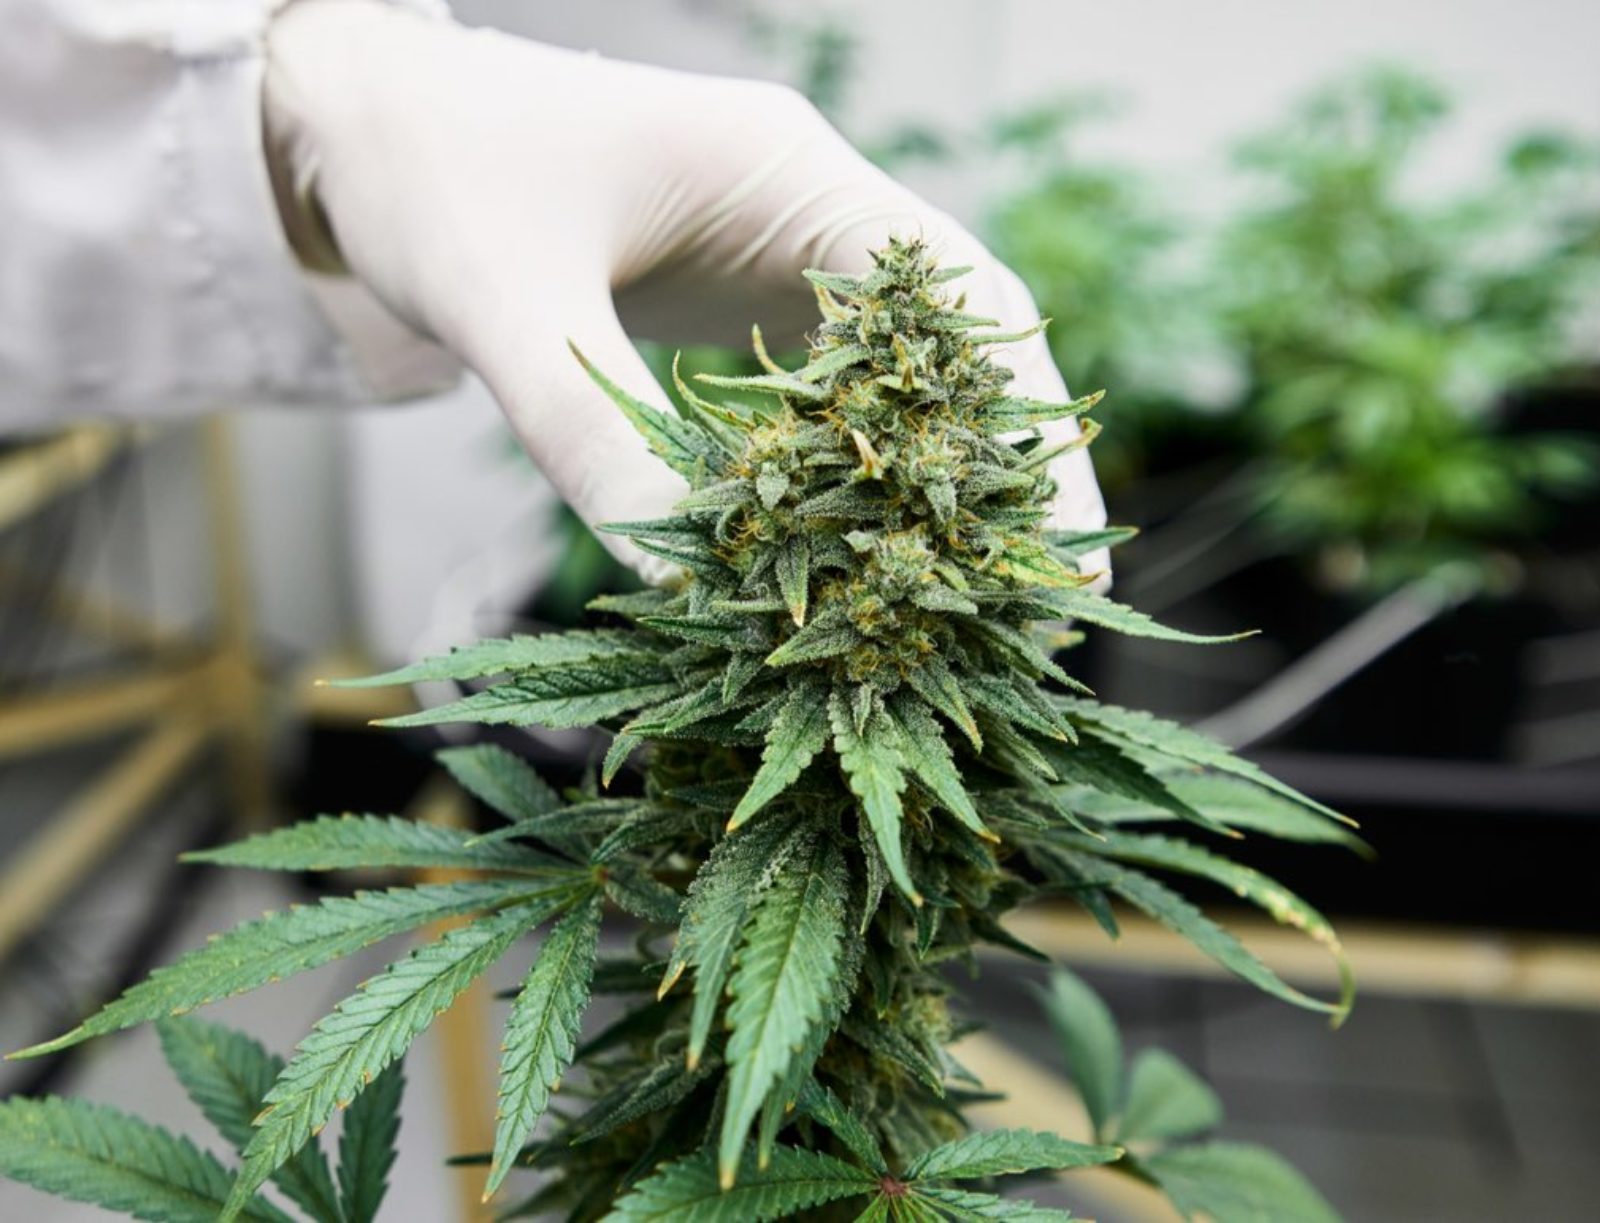 a white gloved hand inspecting cannabis buds on the plant